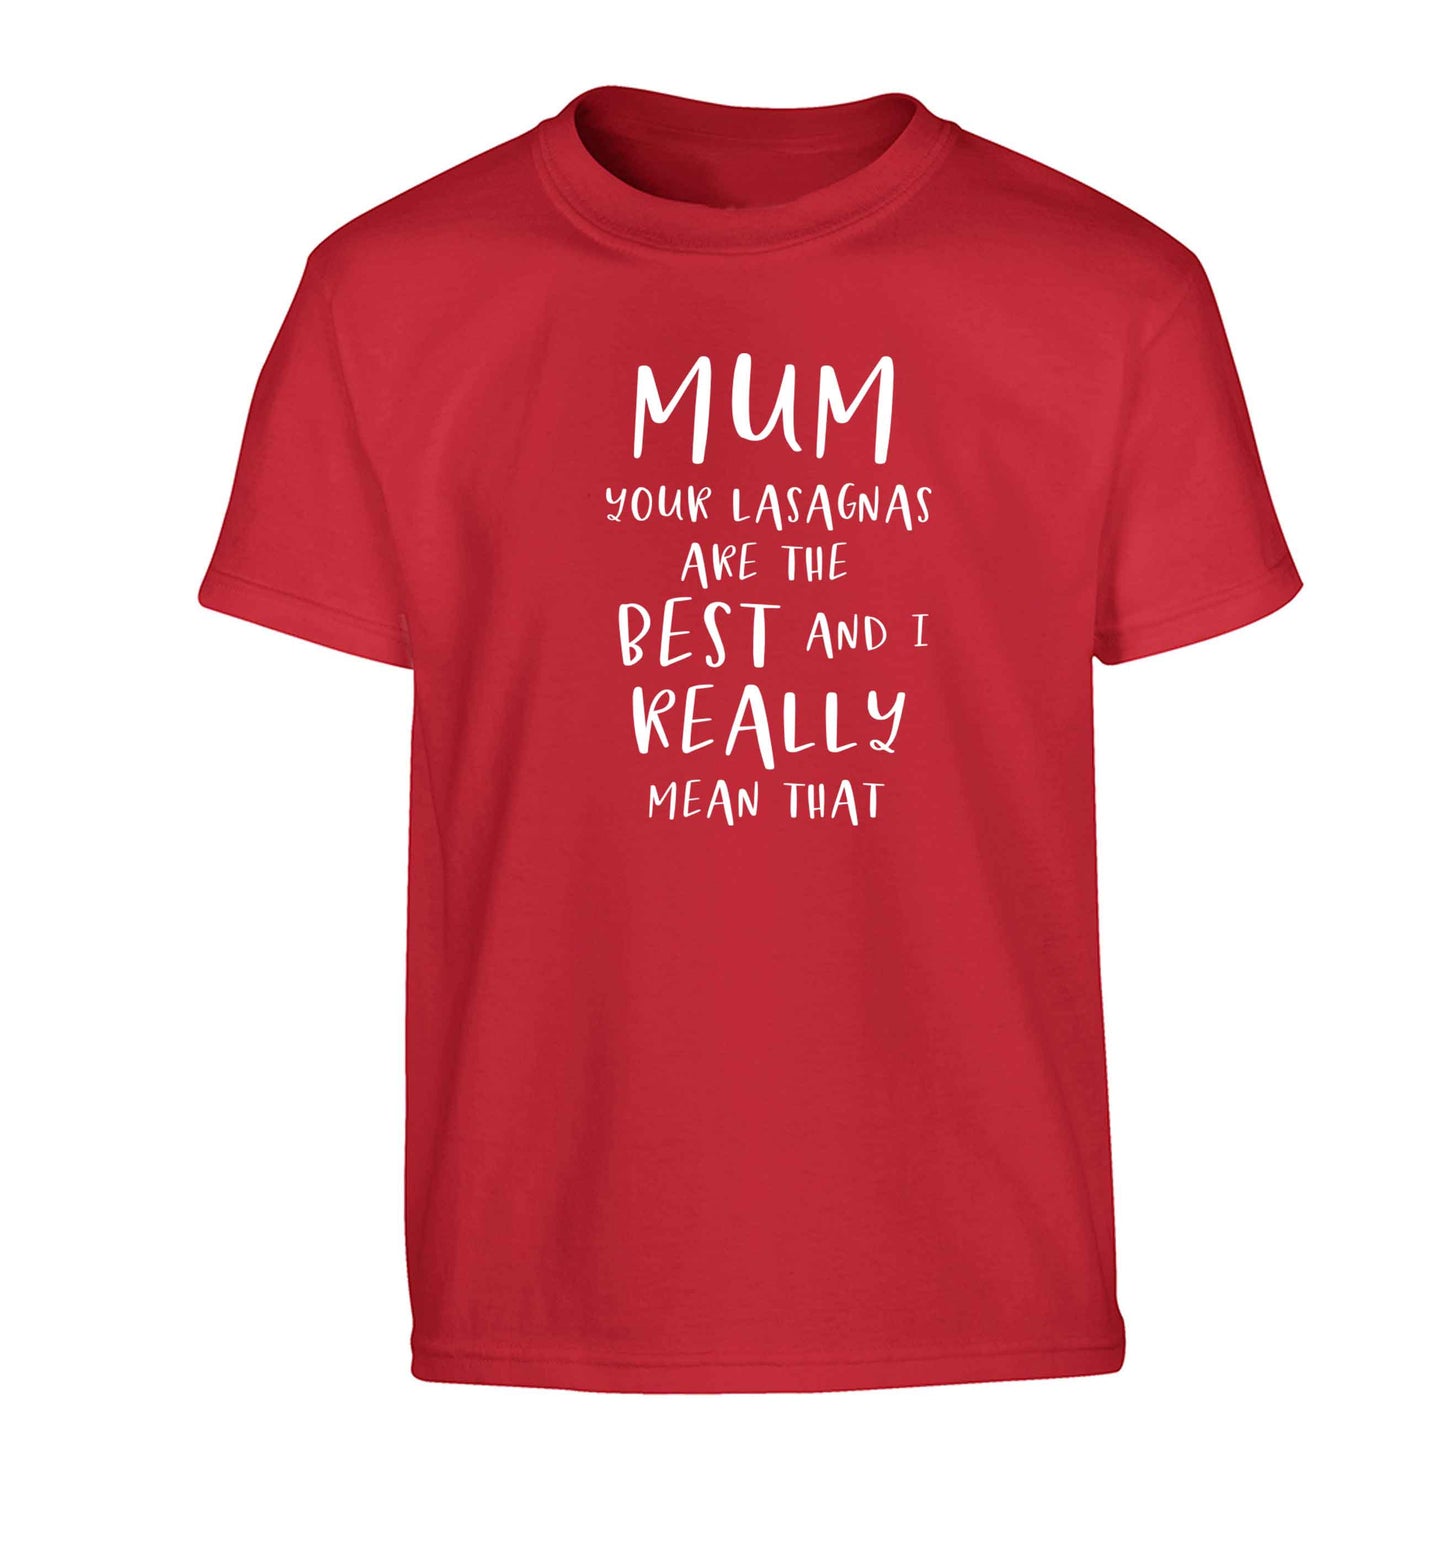 Funny gifts for your mum on mother's dayor her birthday! Mum your lasagnas are the best and I really mean that Children's red Tshirt 12-13 Years